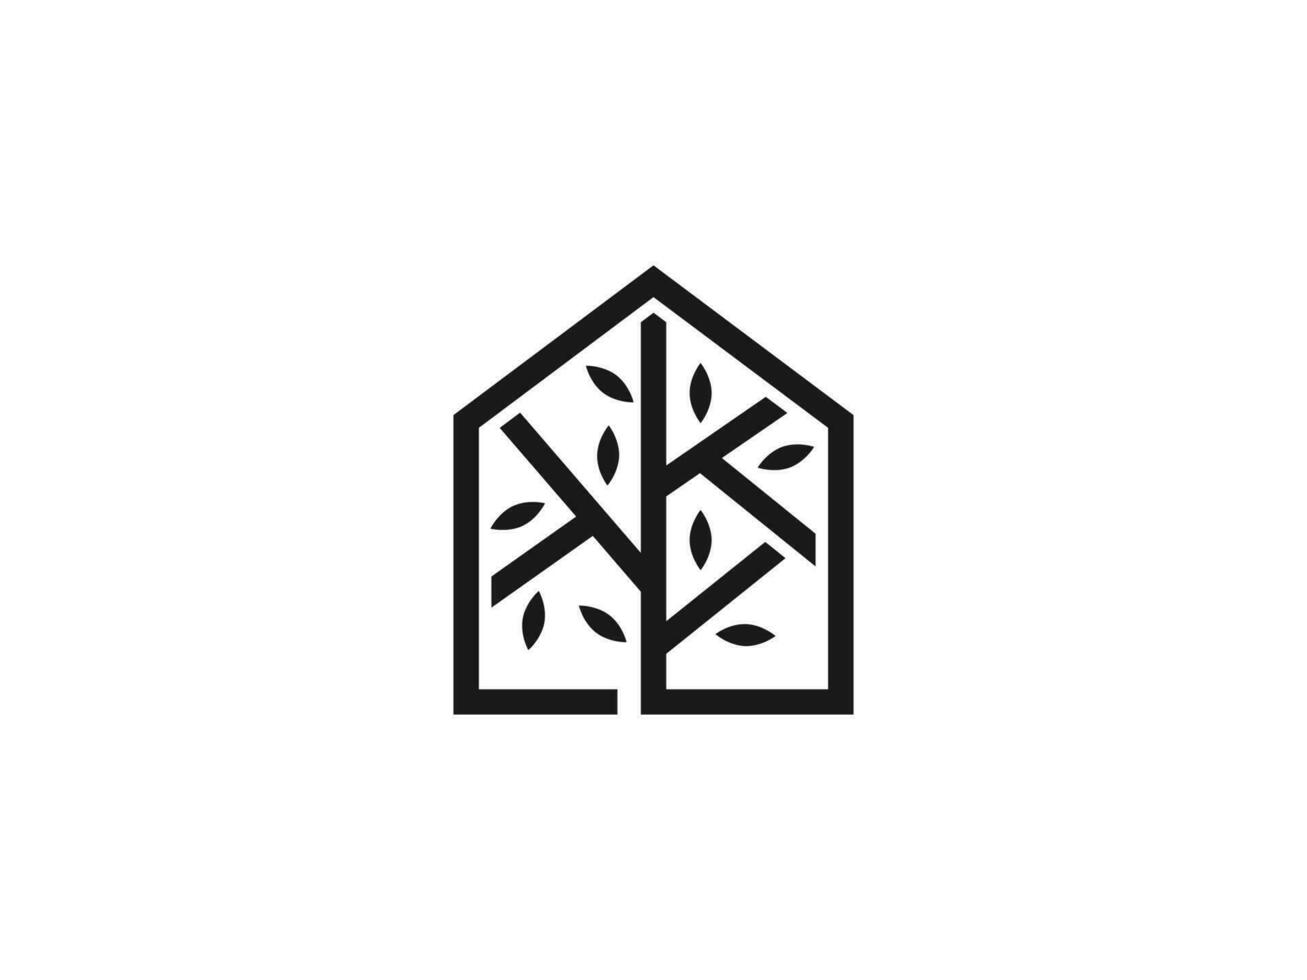 nature house logo vector illustration. tree house vector icon